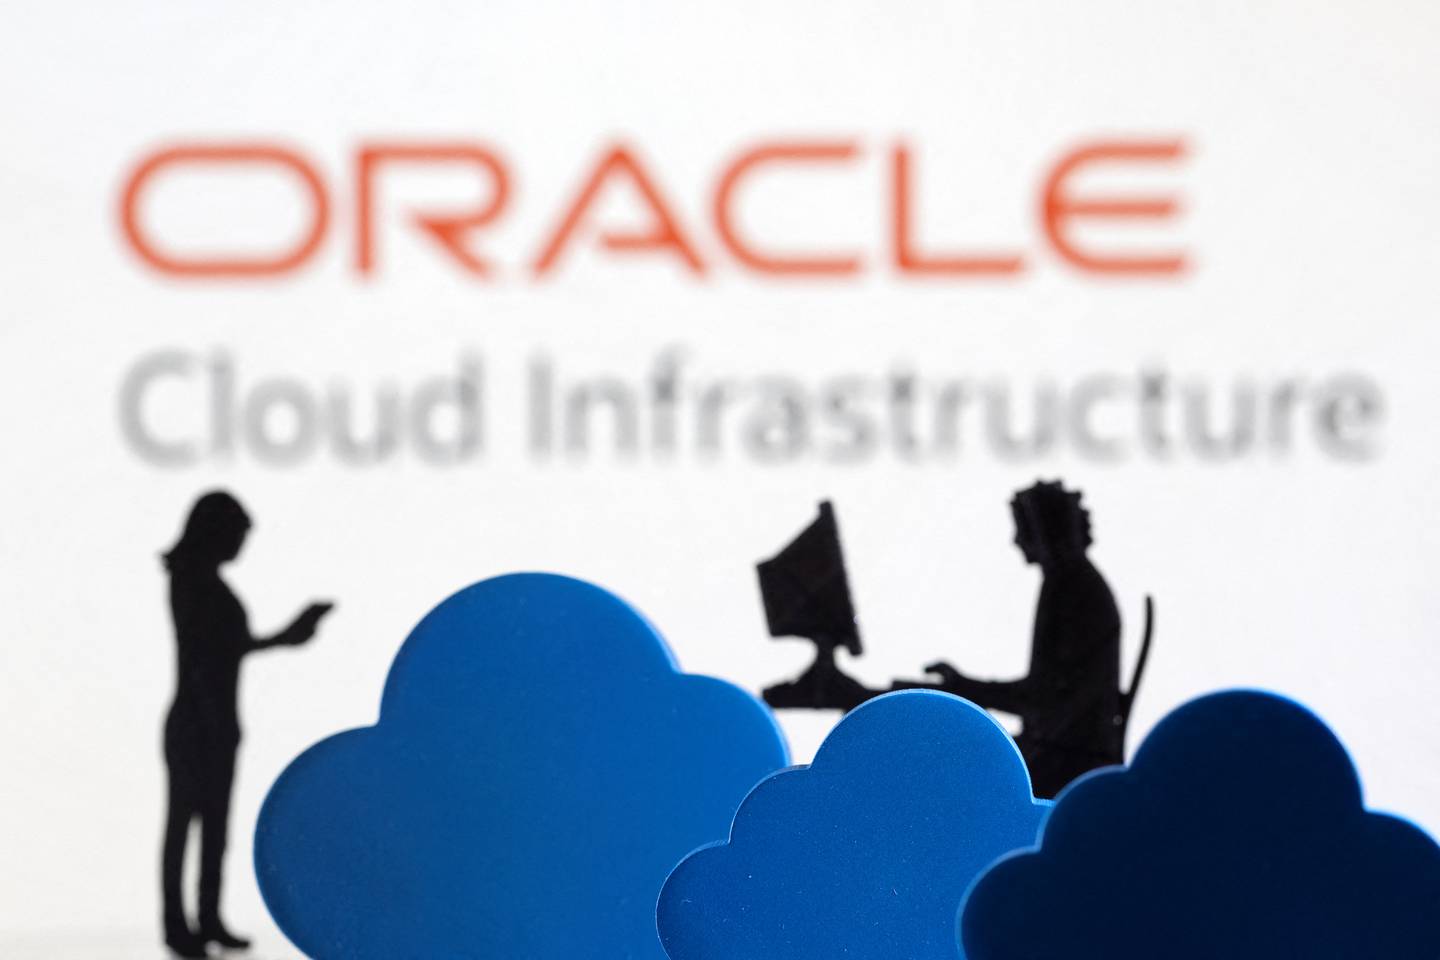 US technology company Oracle announced a series of new cloud-focused products at Oracle Cloud World. Reuters